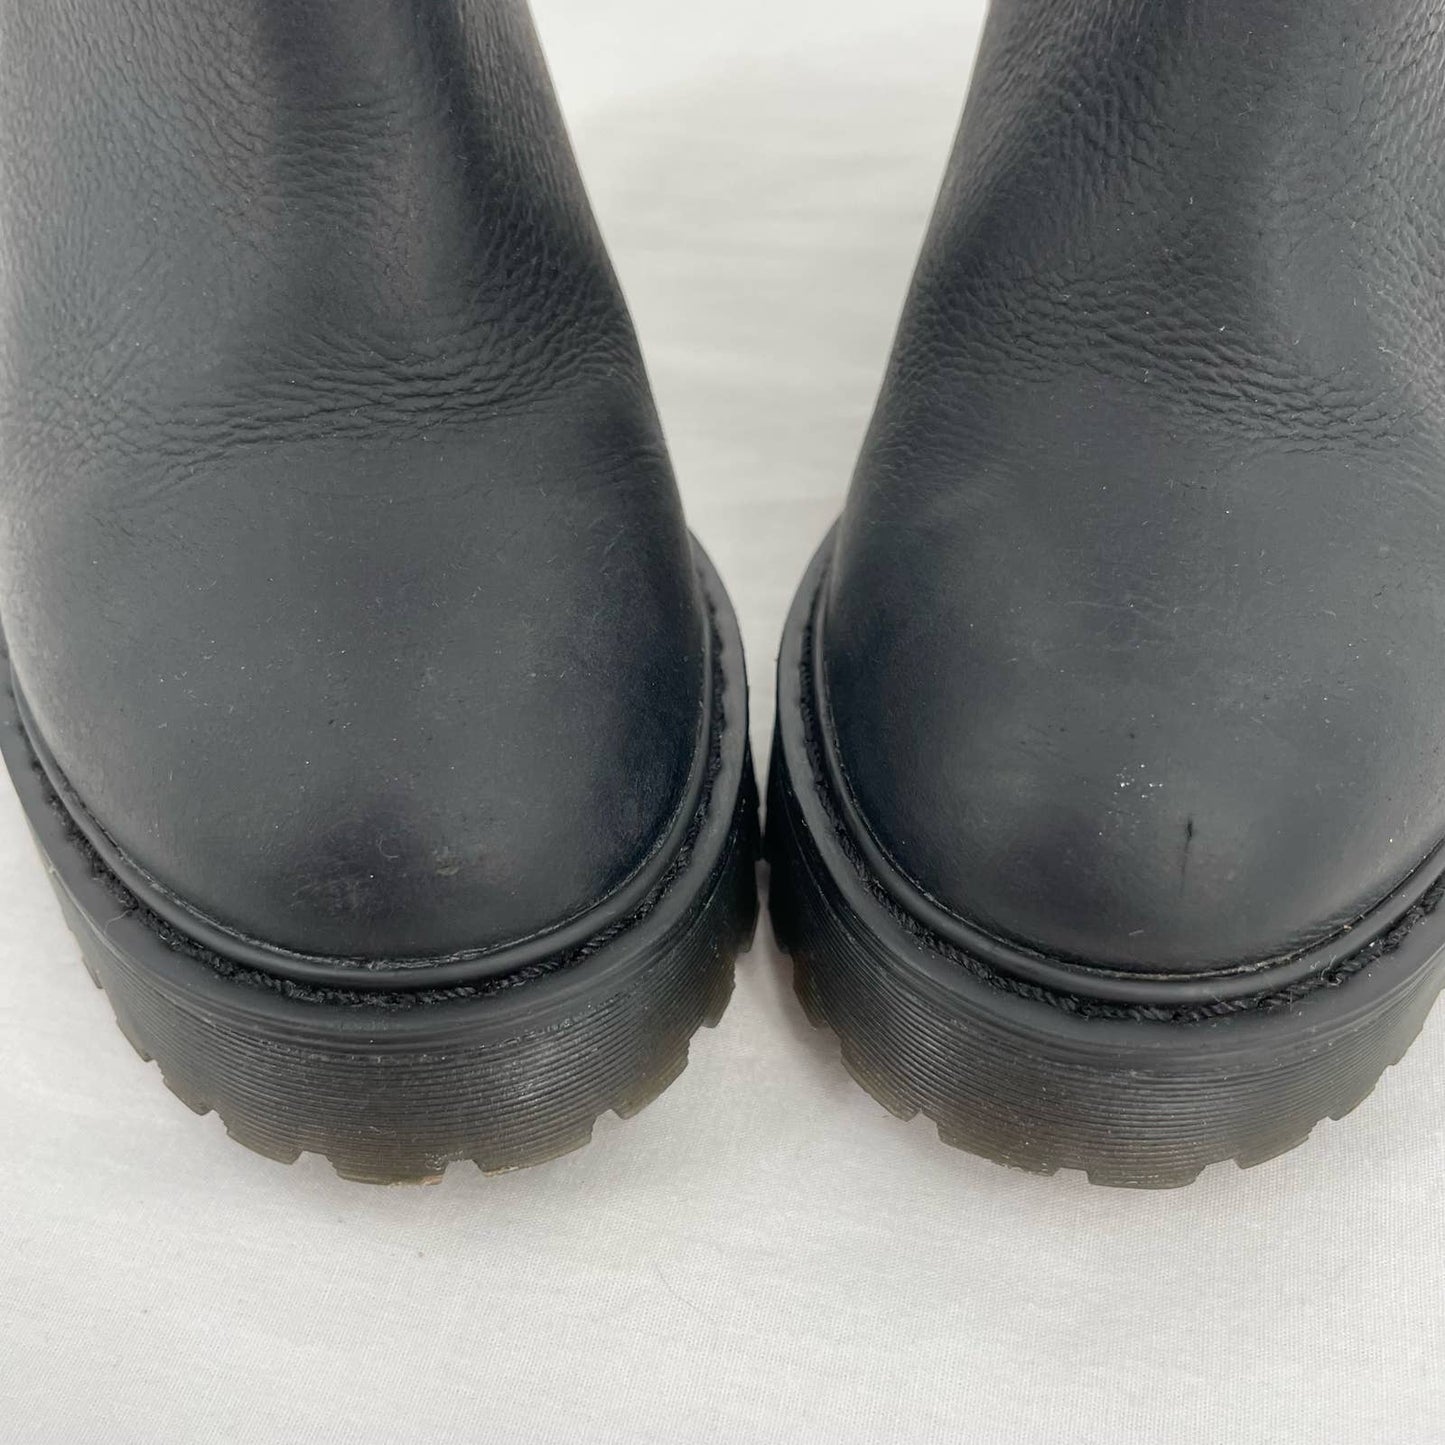 Dr. Martens Magdalena Black Blackout Monochromatic Leather Heeled Ankle Boots Size 7